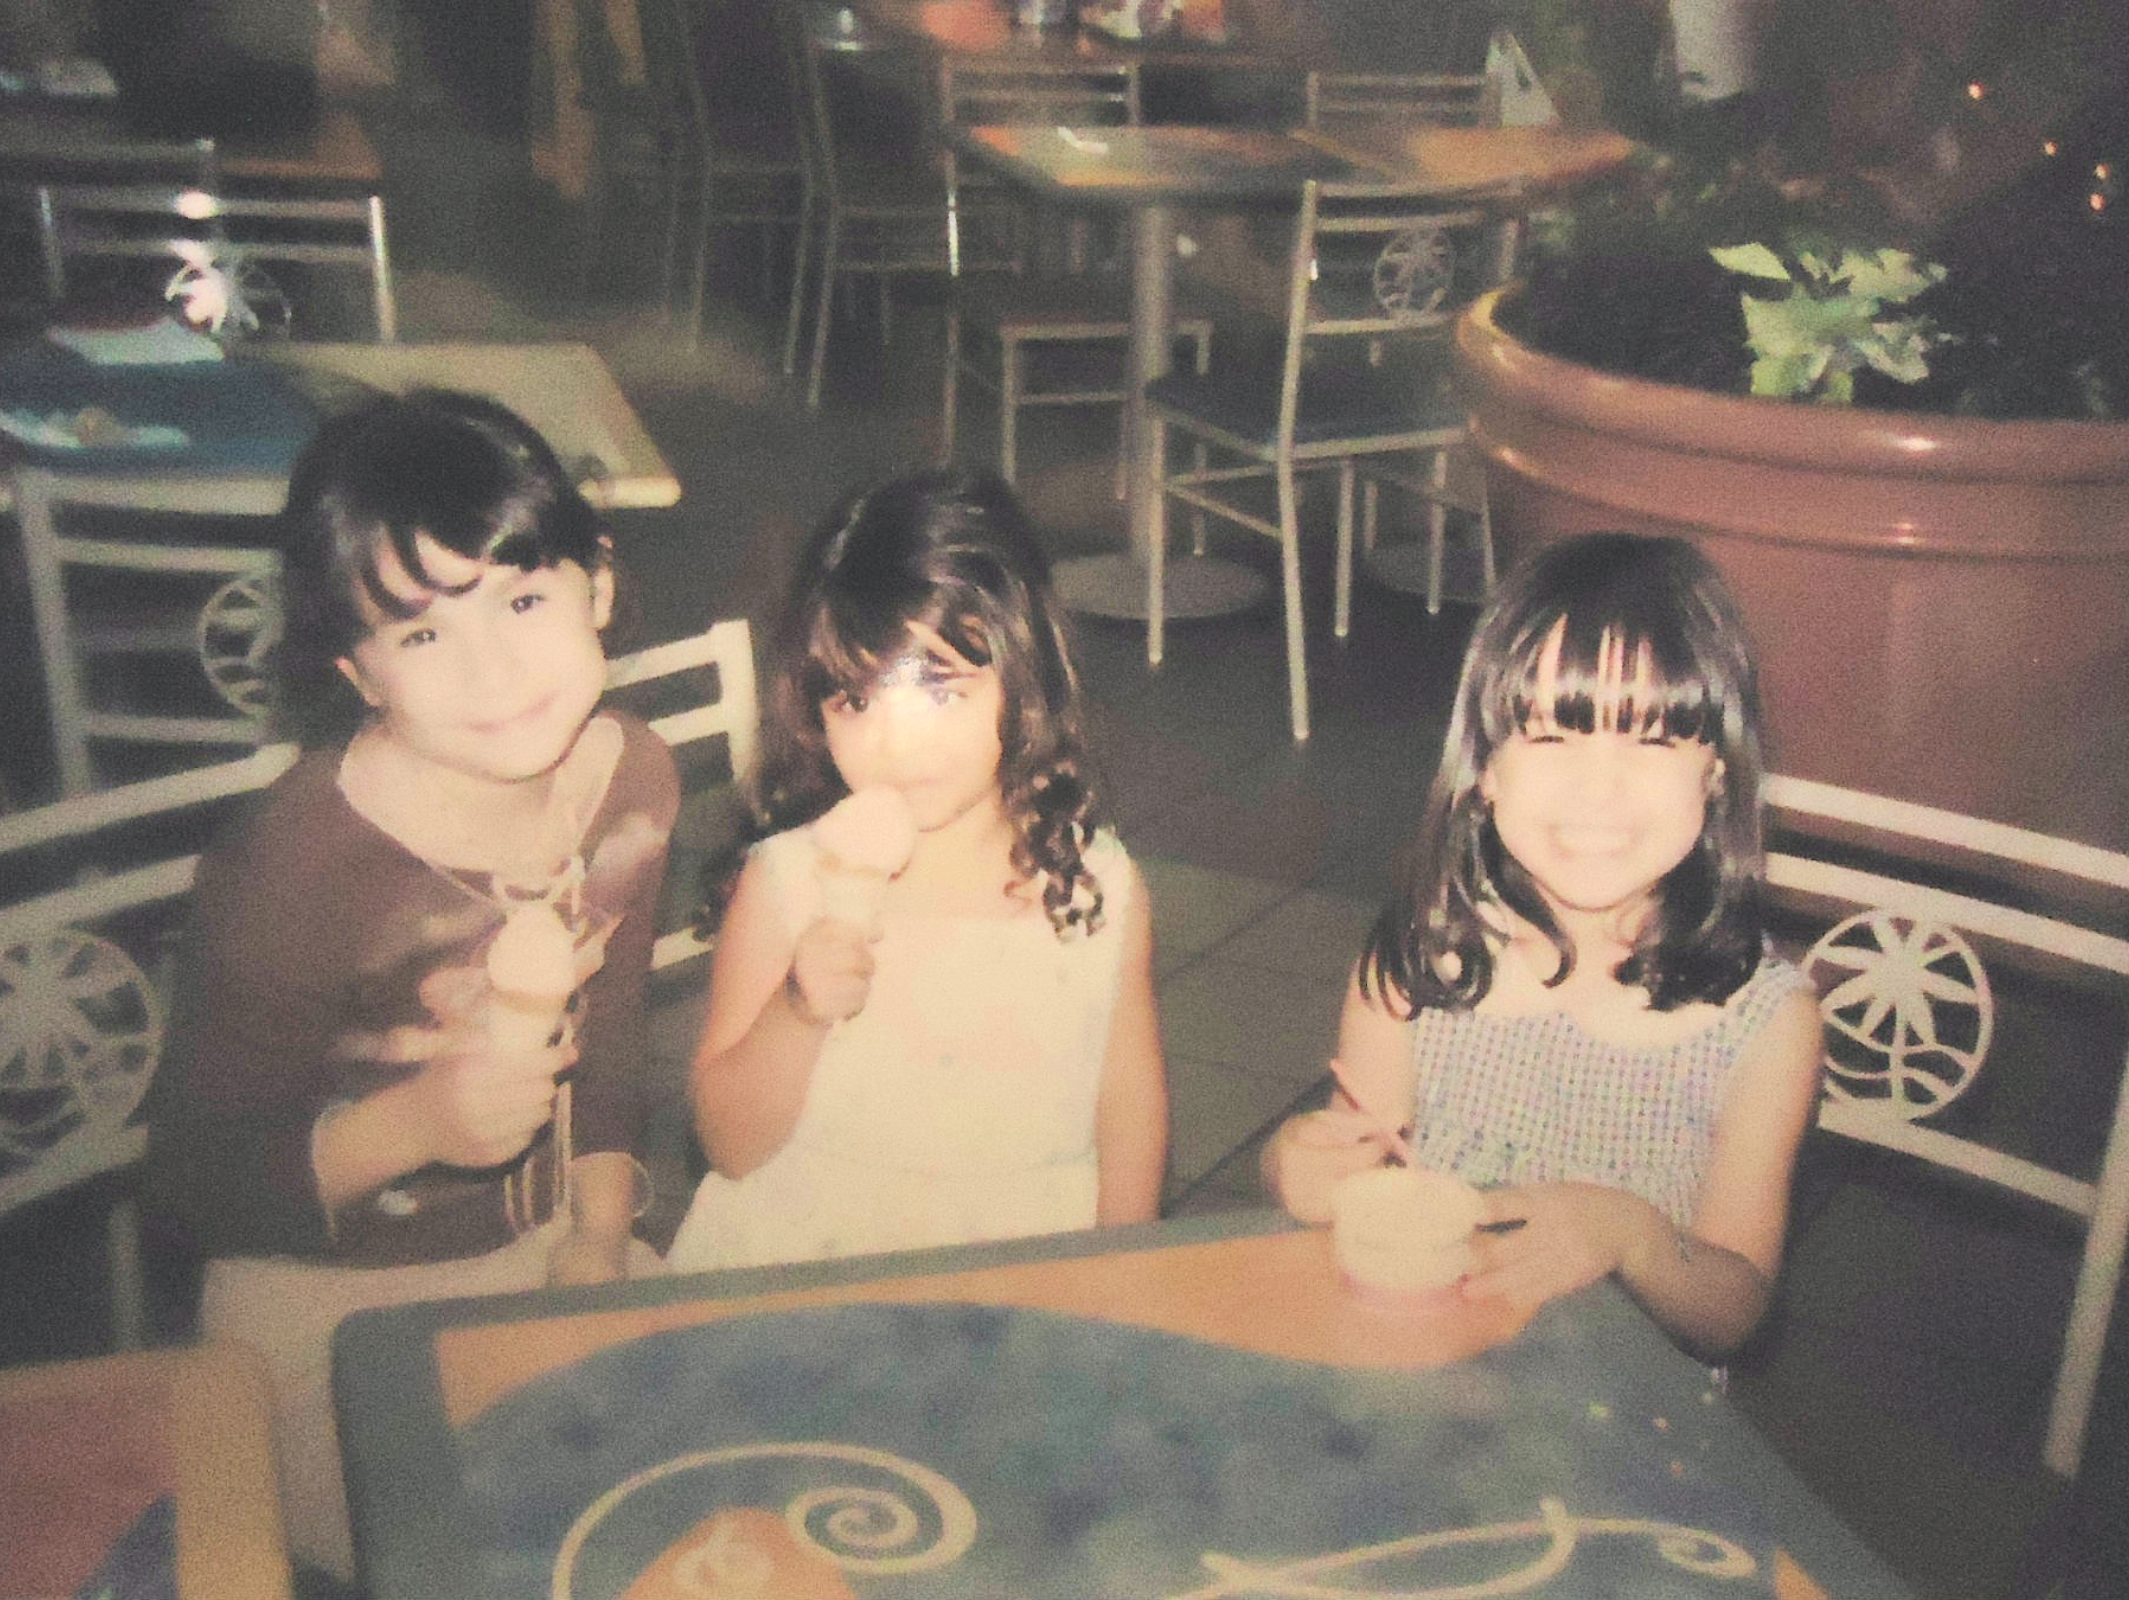 A photograph of the author as a young girl, eating ice cream with two other girls